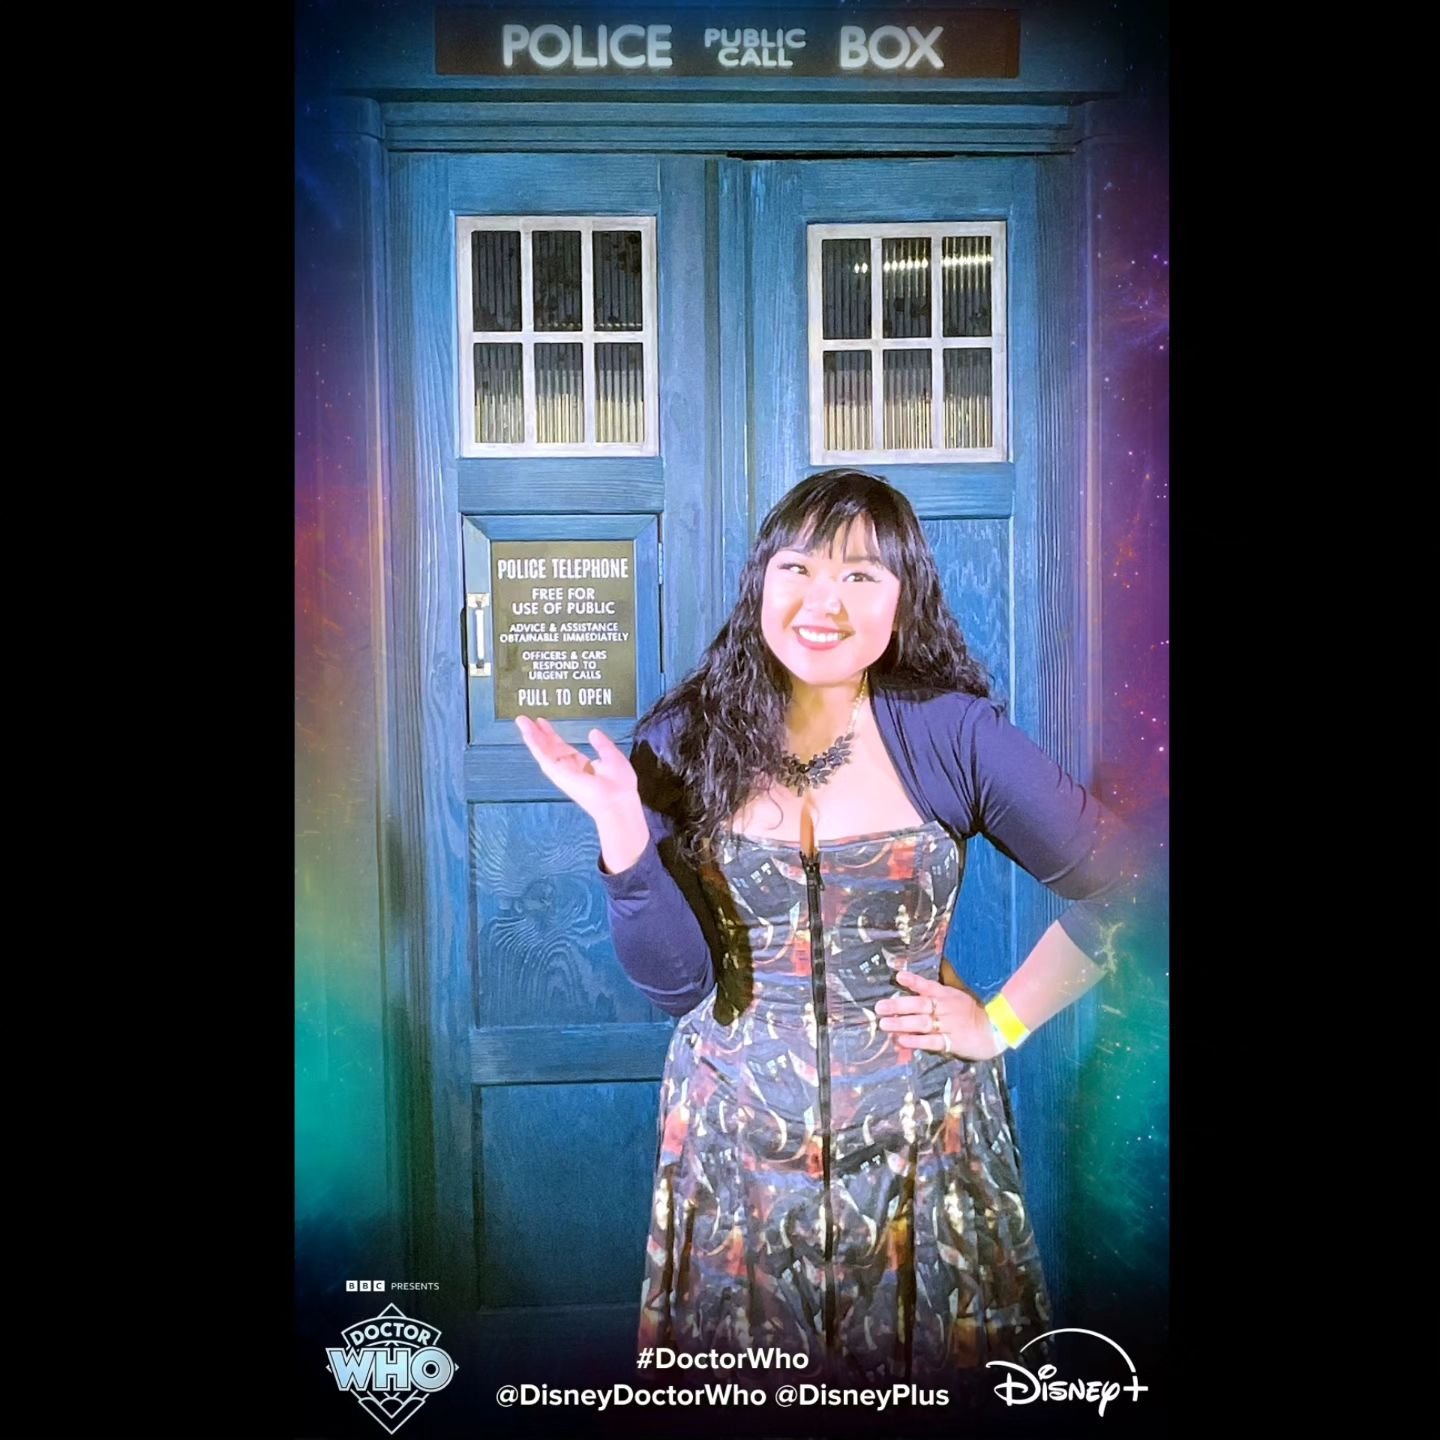 Calling all Whovians! Get ready for your next favorite Doctor! 

Had the honor to attend the #DoctorWho premiere and worked the red carpet chatting with Ncuti Gatwa, Millie Gibson, and Russell T Davies. 💙💙

Loved seeing all my friends. They're all 